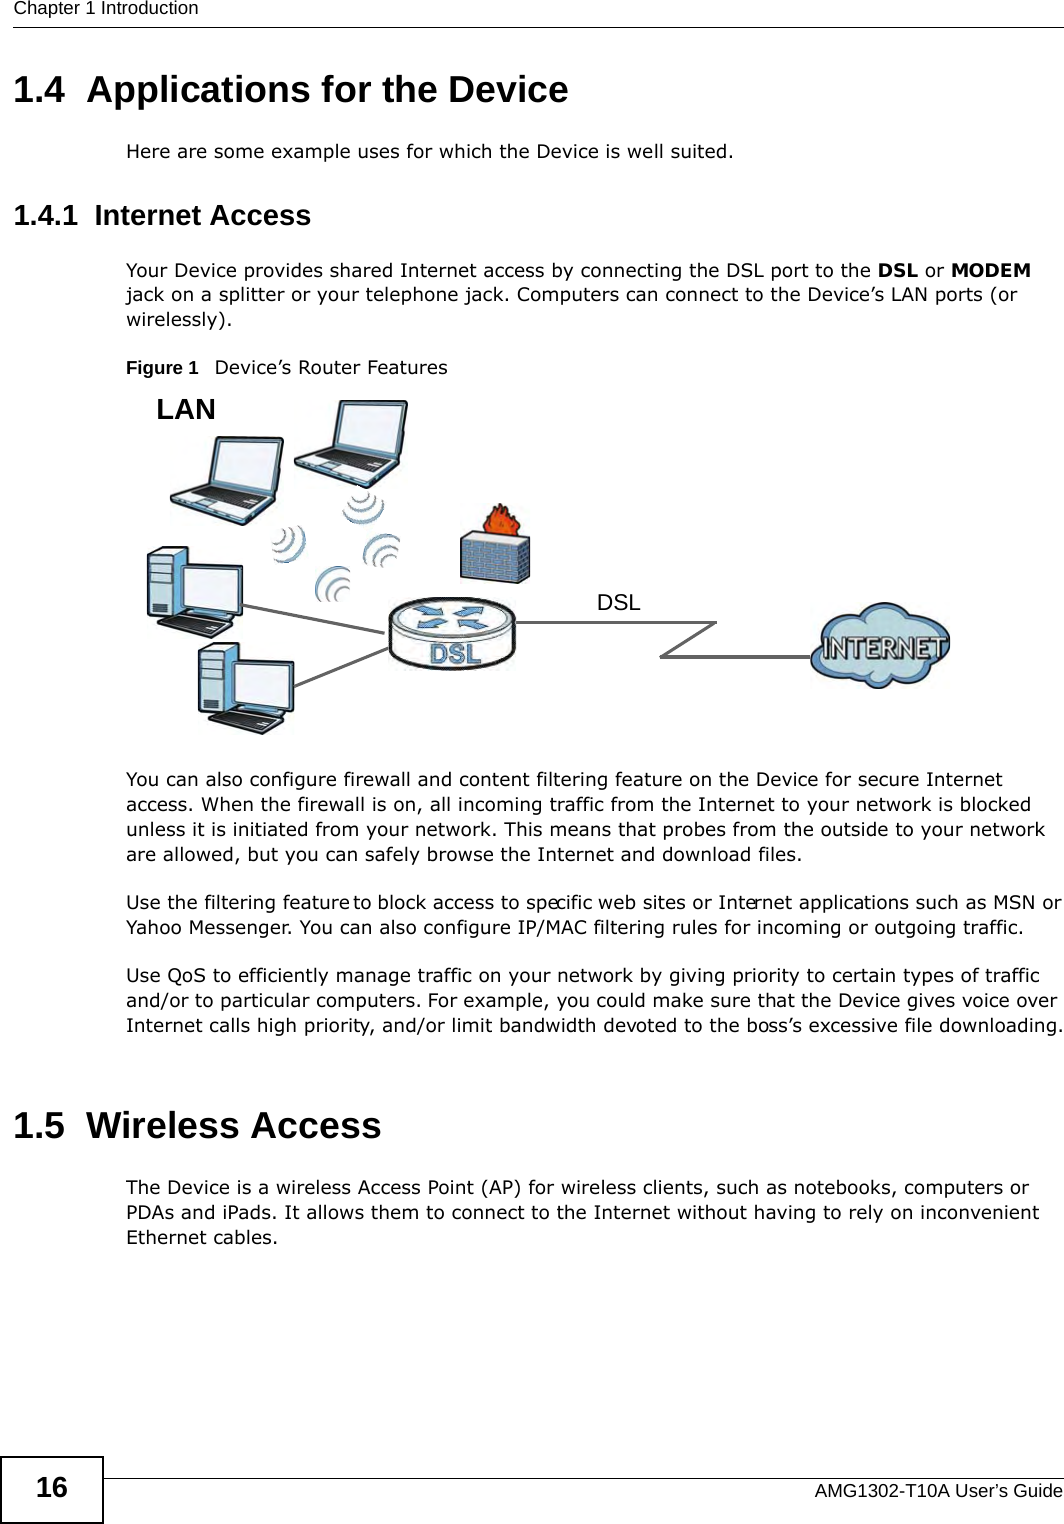 Chapter 1 IntroductionAMG1302-T10A User’s Guide161.4  Applications for the DeviceHere are some example uses for which the Device is well suited.1.4.1  Internet AccessYour Device provides shared Internet access by connecting the DSL port to the DSL or MODEM jack on a splitter or your telephone jack. Computers can connect to the Device’s LAN ports (or wirelessly).Figure 1   Device’s Router FeaturesYou can also configure firewall and content filtering feature on the Device for secure Internet access. When the firewall is on, all incoming traffic from the Internet to your network is blocked unless it is initiated from your network. This means that probes from the outside to your network are allowed, but you can safely browse the Internet and download files.Use the filtering feature to block access to specific web sites or Internet applications such as MSN or Yahoo Messenger. You can also configure IP/MAC filtering rules for incoming or outgoing traffic.Use QoS to efficiently manage traffic on your network by giving priority to certain types of traffic and/or to particular computers. For example, you could make sure that the Device gives voice over Internet calls high priority, and/or limit bandwidth devoted to the boss’s excessive file downloading.1.5  Wireless AccessThe Device is a wireless Access Point (AP) for wireless clients, such as notebooks, computers or PDAs and iPads. It allows them to connect to the Internet without having to rely on inconvenient Ethernet cables.DSLLAN